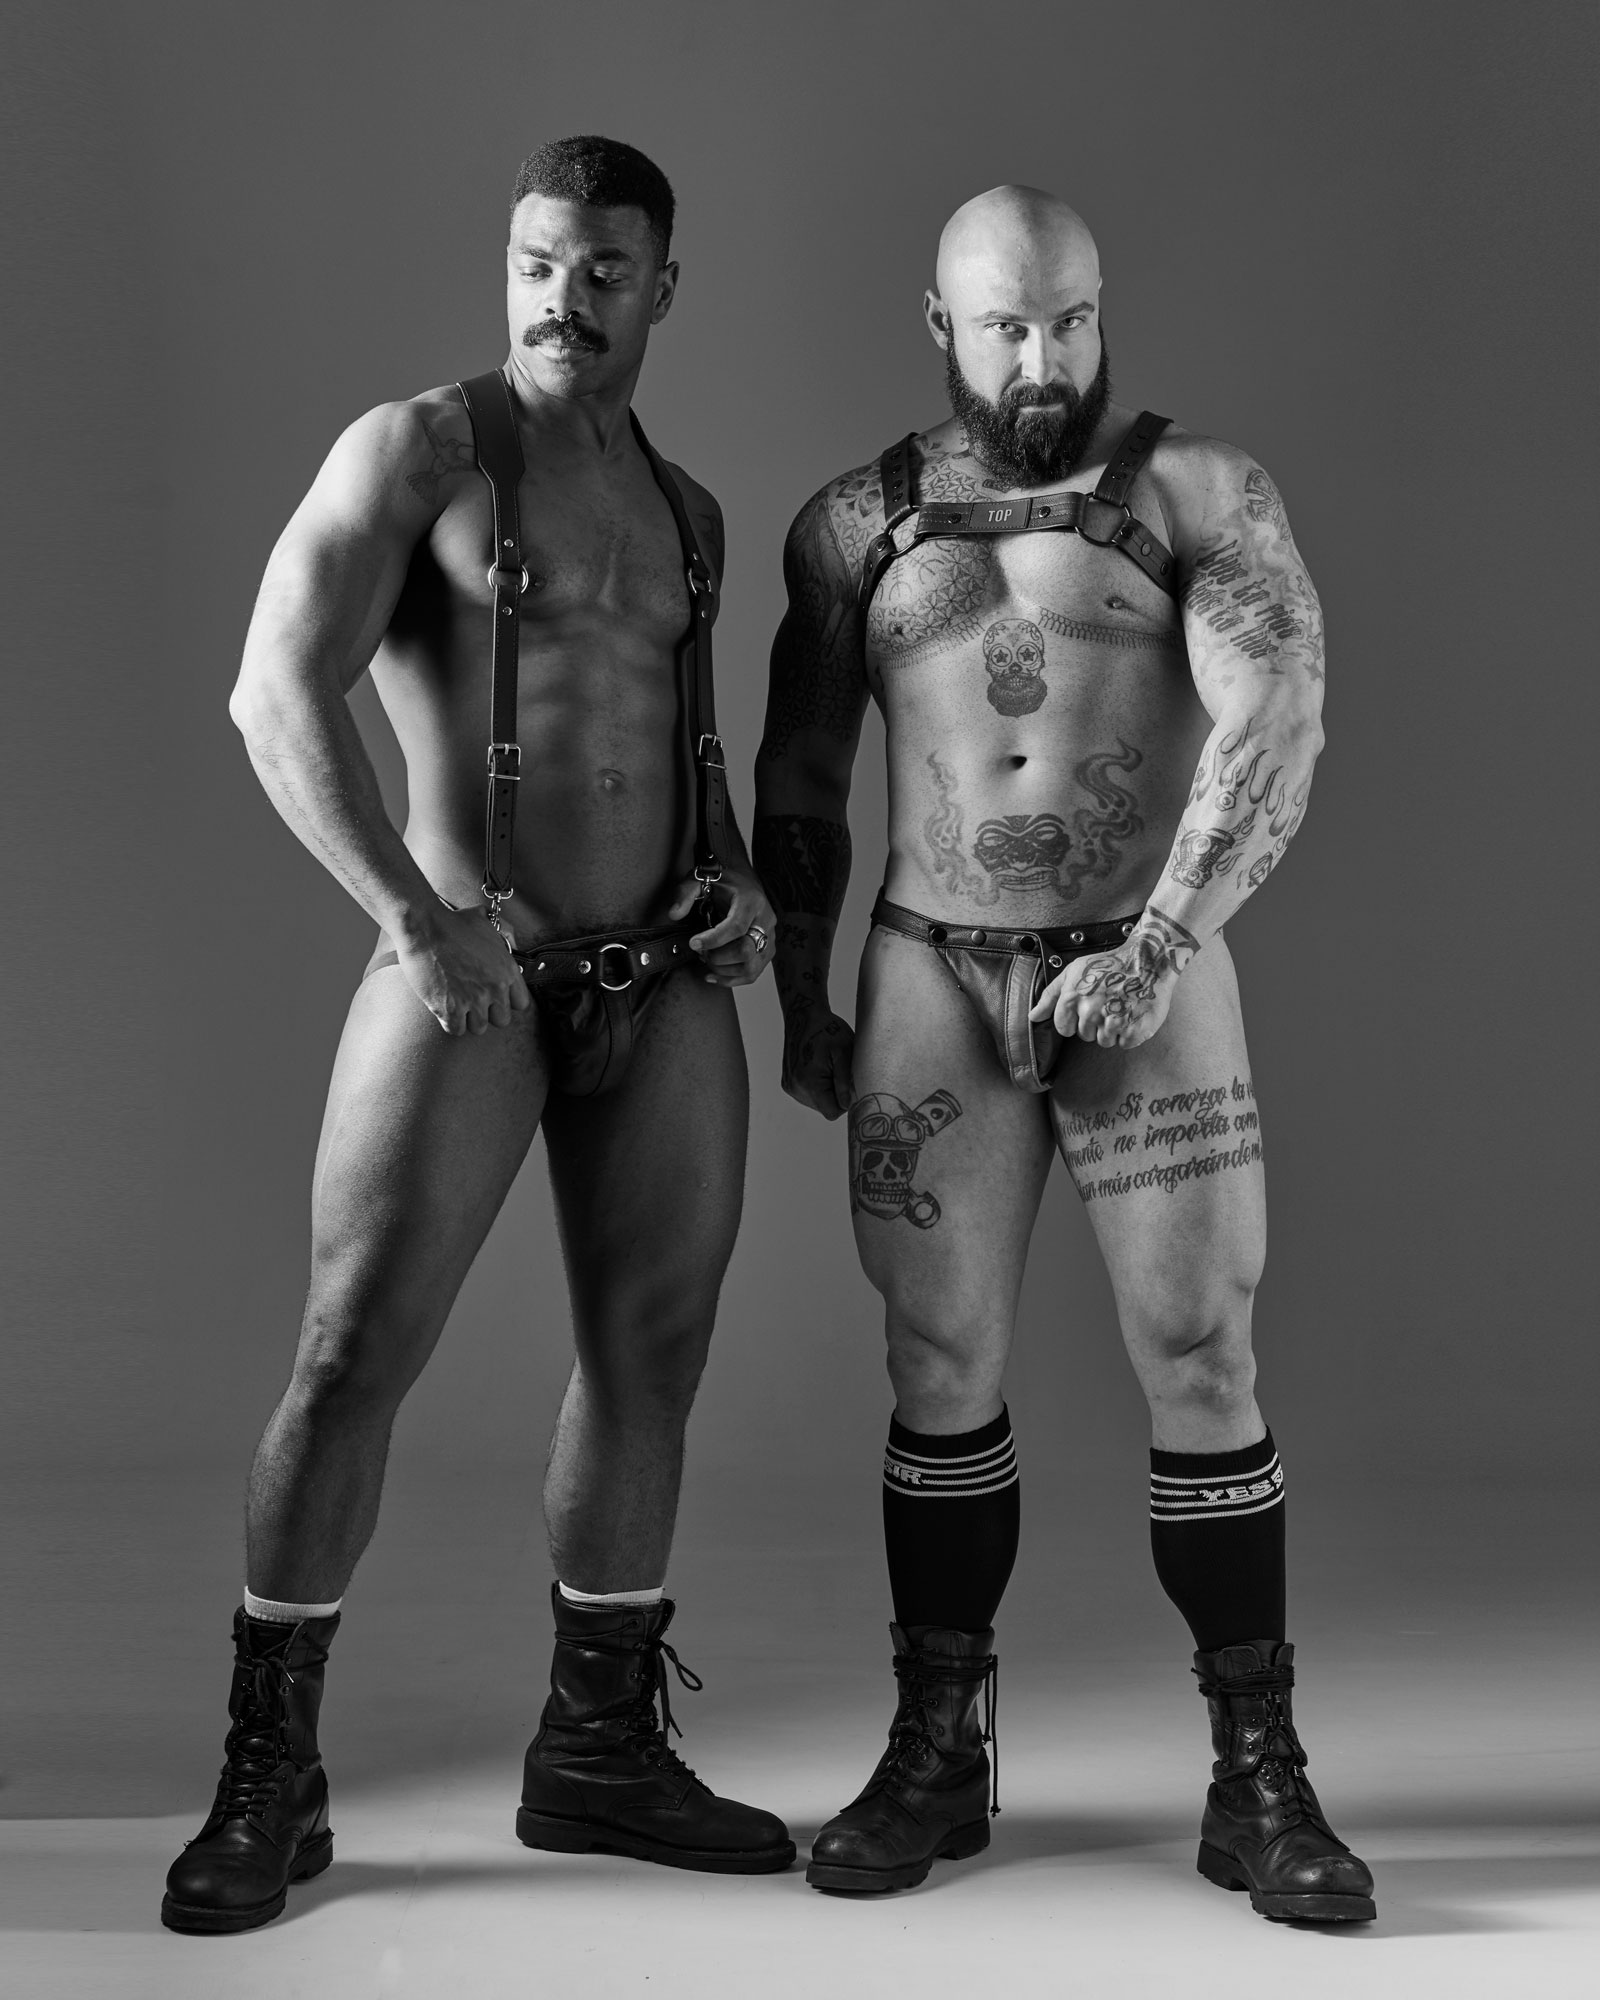 – EXCLUSIVE – “MEN IN LEATHER, SECOND SKIN” – Bicho & Druny Williams by Jesús Leonardo for Yes Sir, part 1.